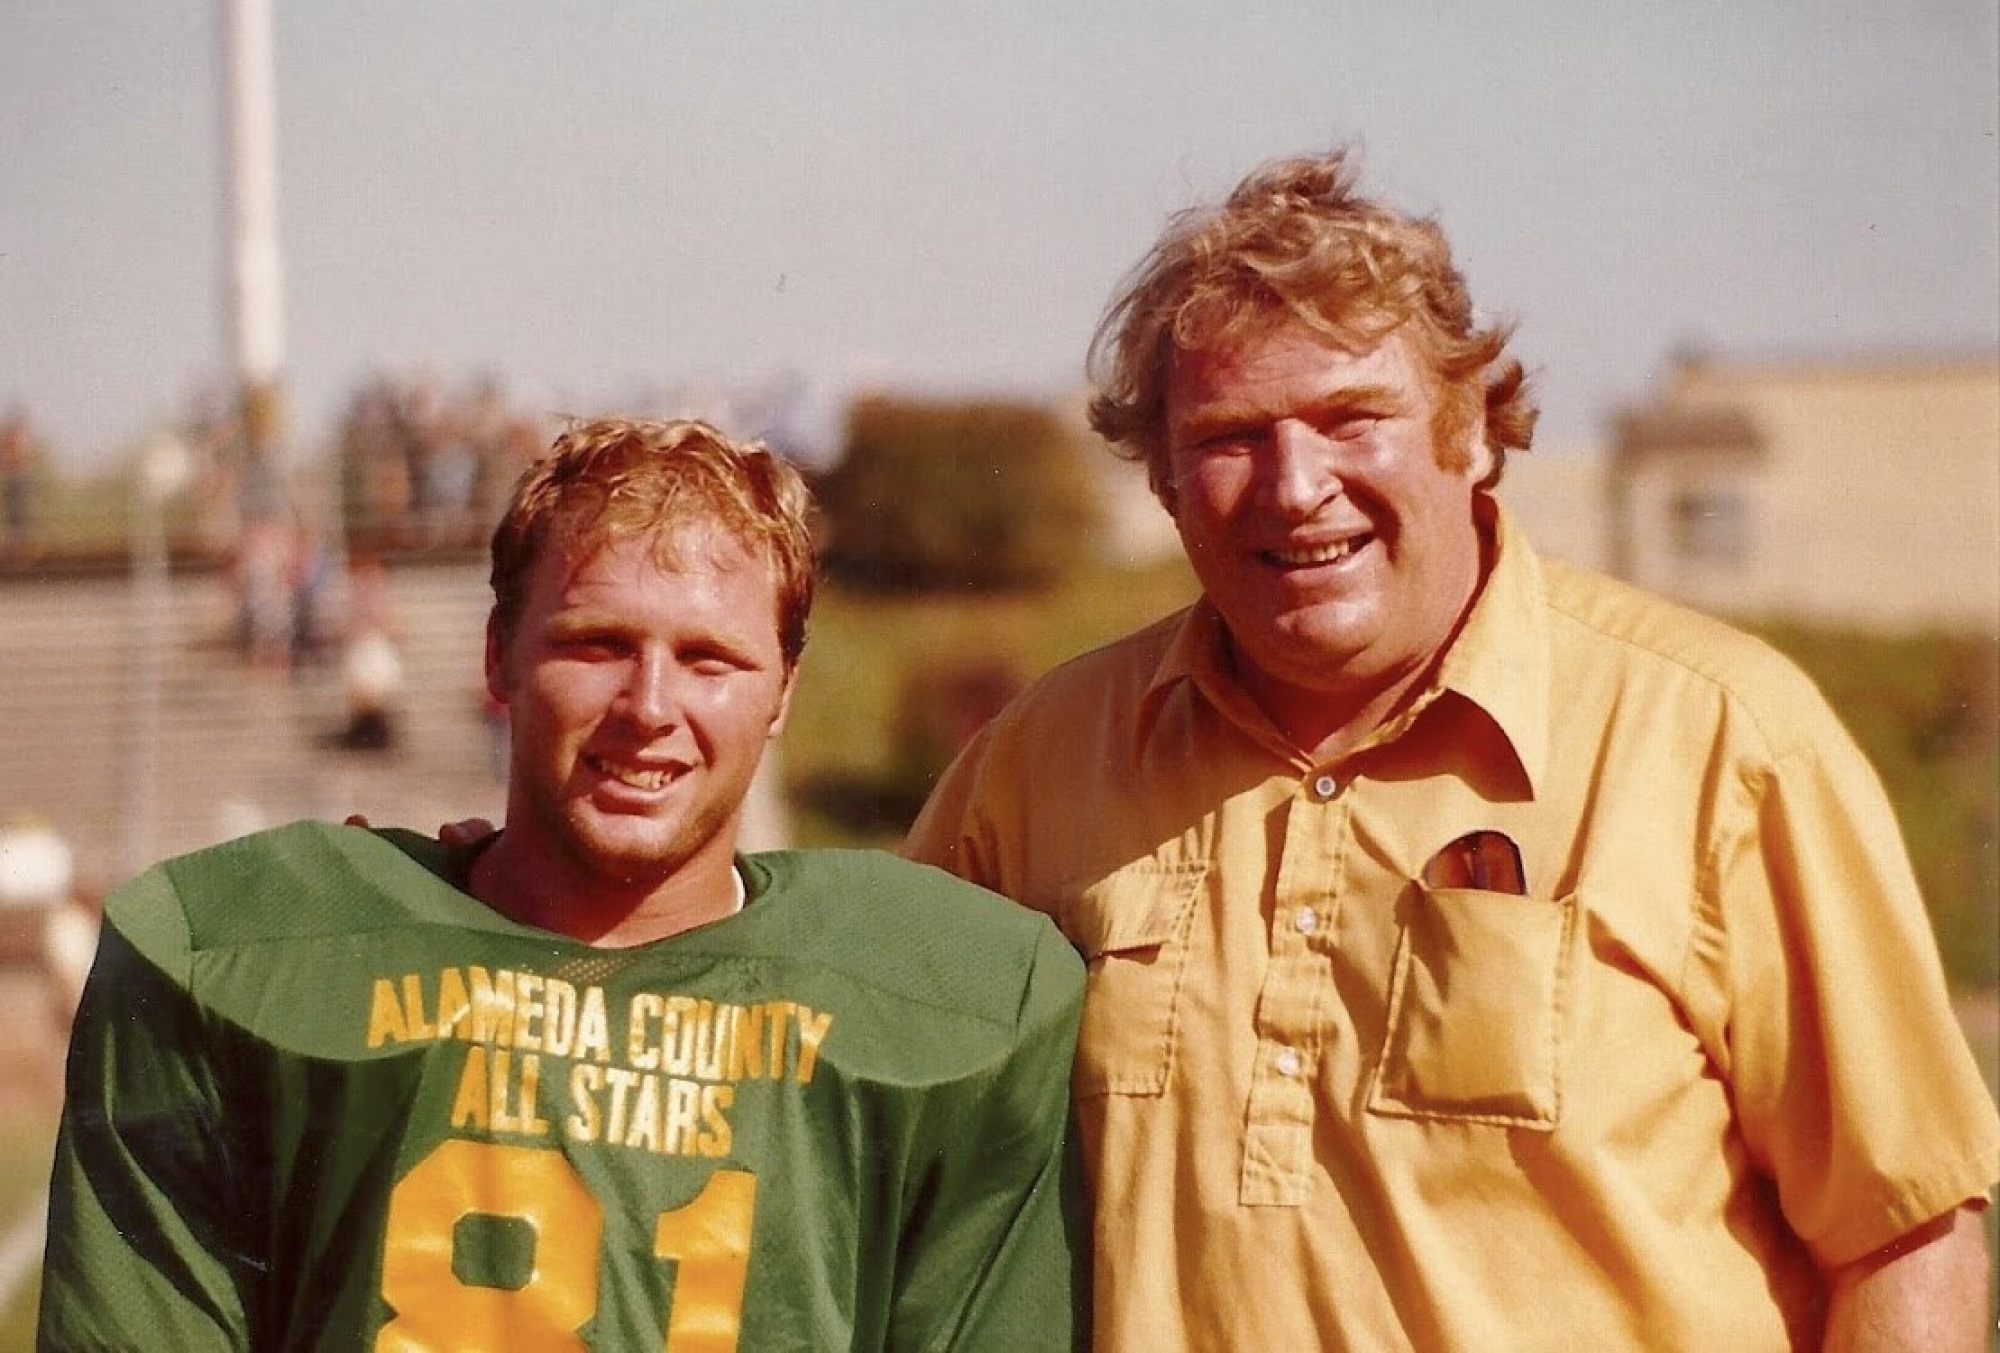 A young Mike Madden in a football jersey stands next to his dad, John Madden